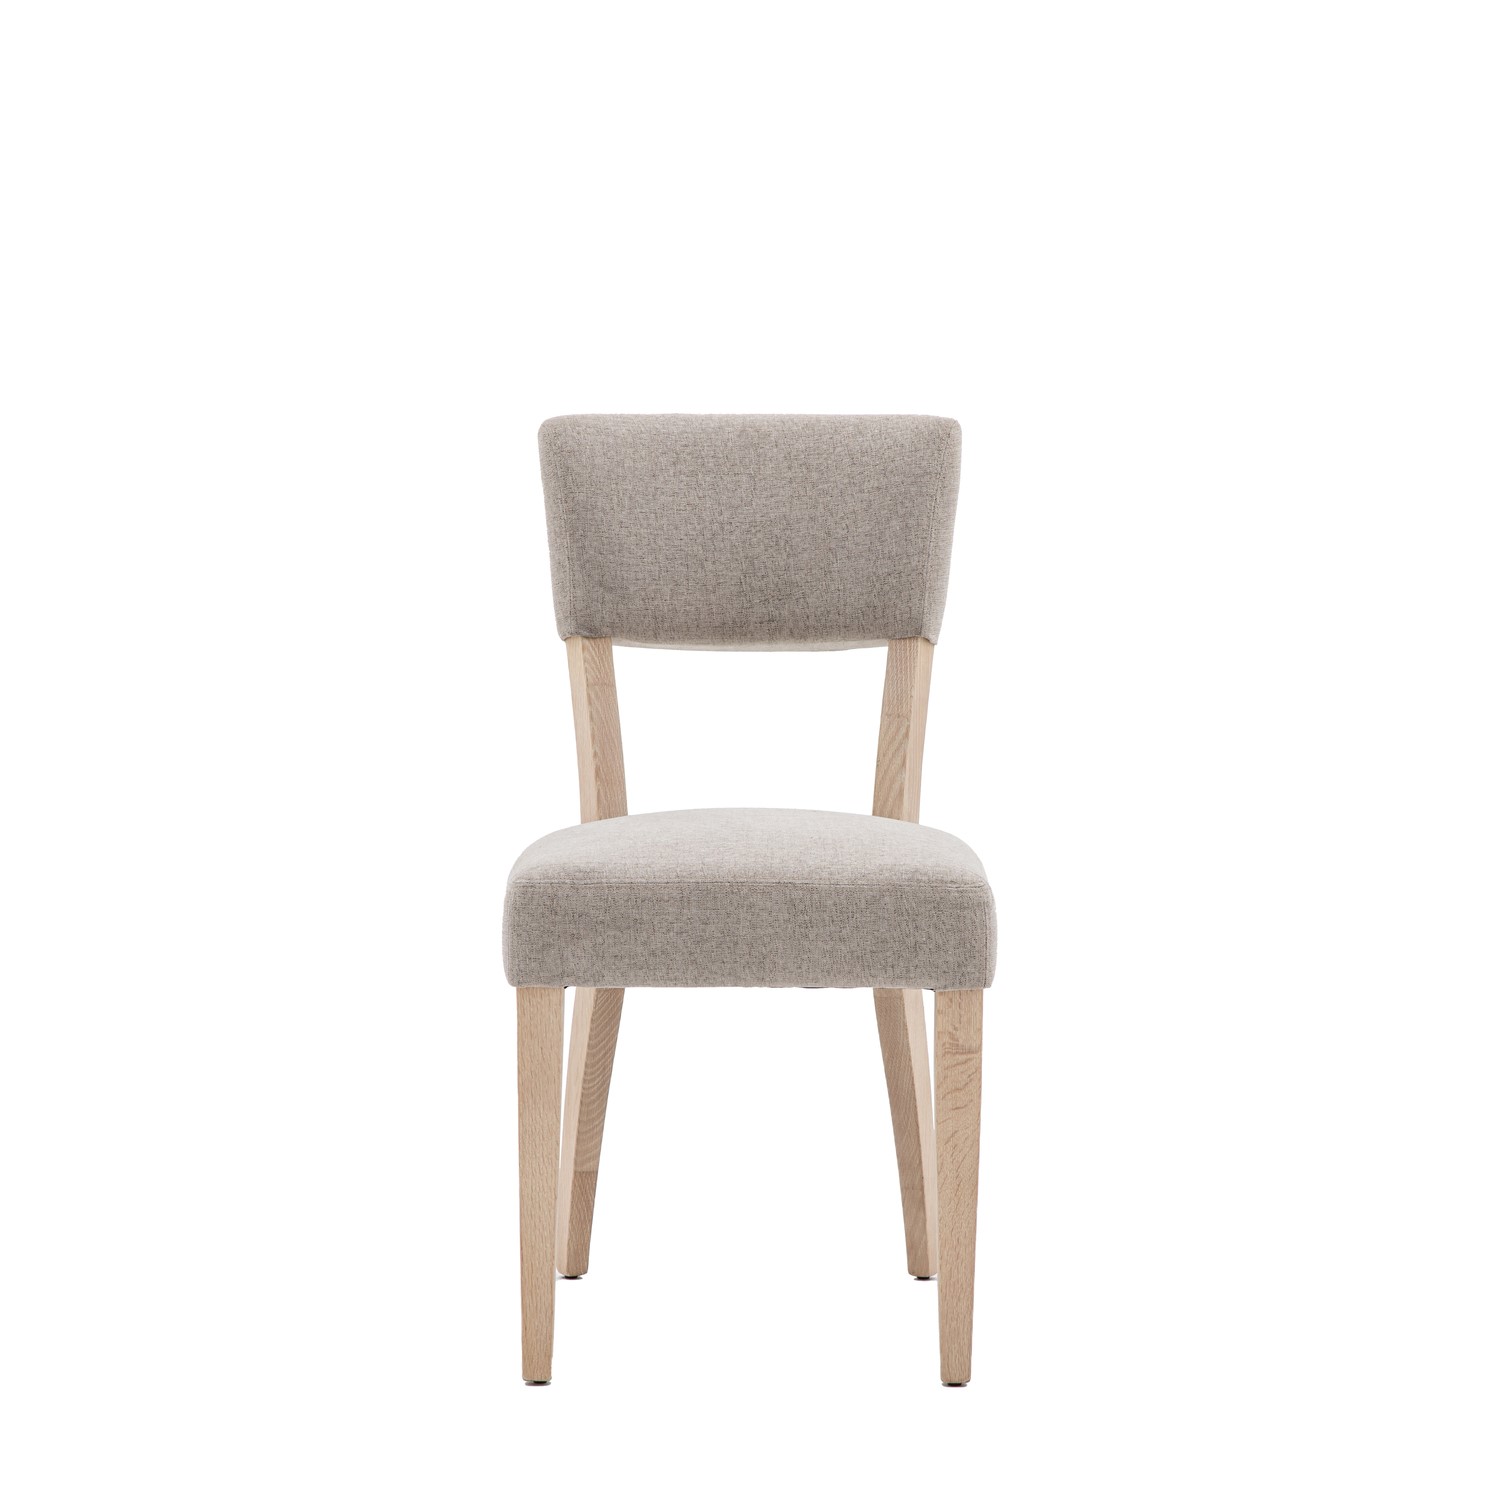 Read more about Eton upholstered dining chairs set of 2 natural caspian house